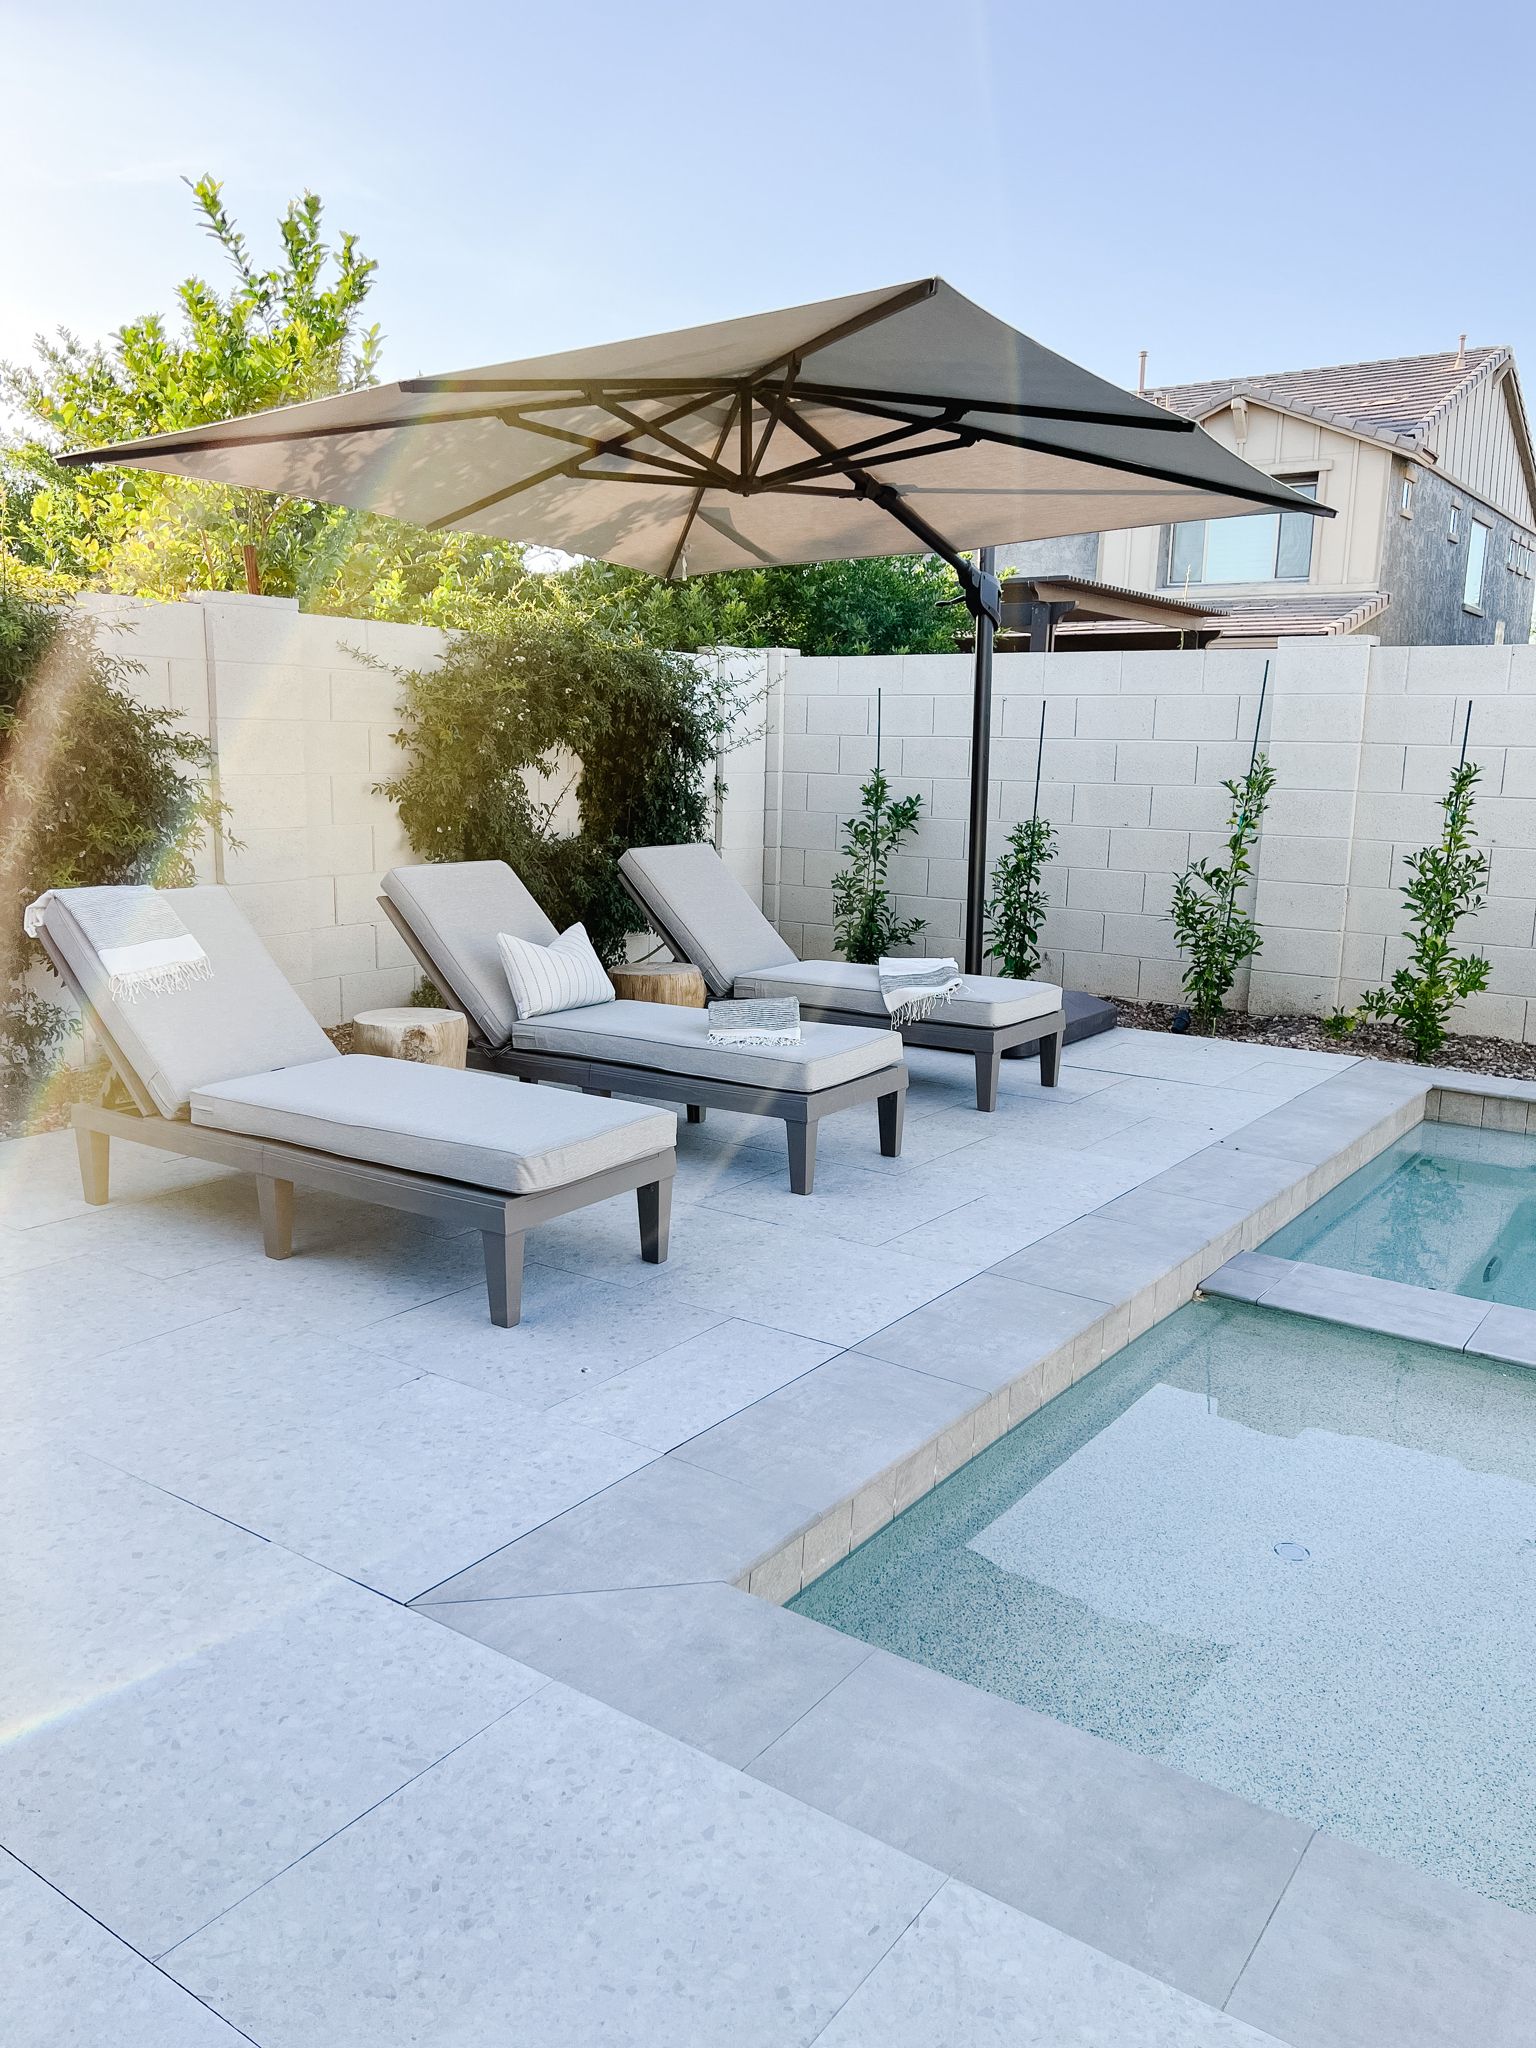 Poolside Comfort: Relax in Style with Pool Chairs